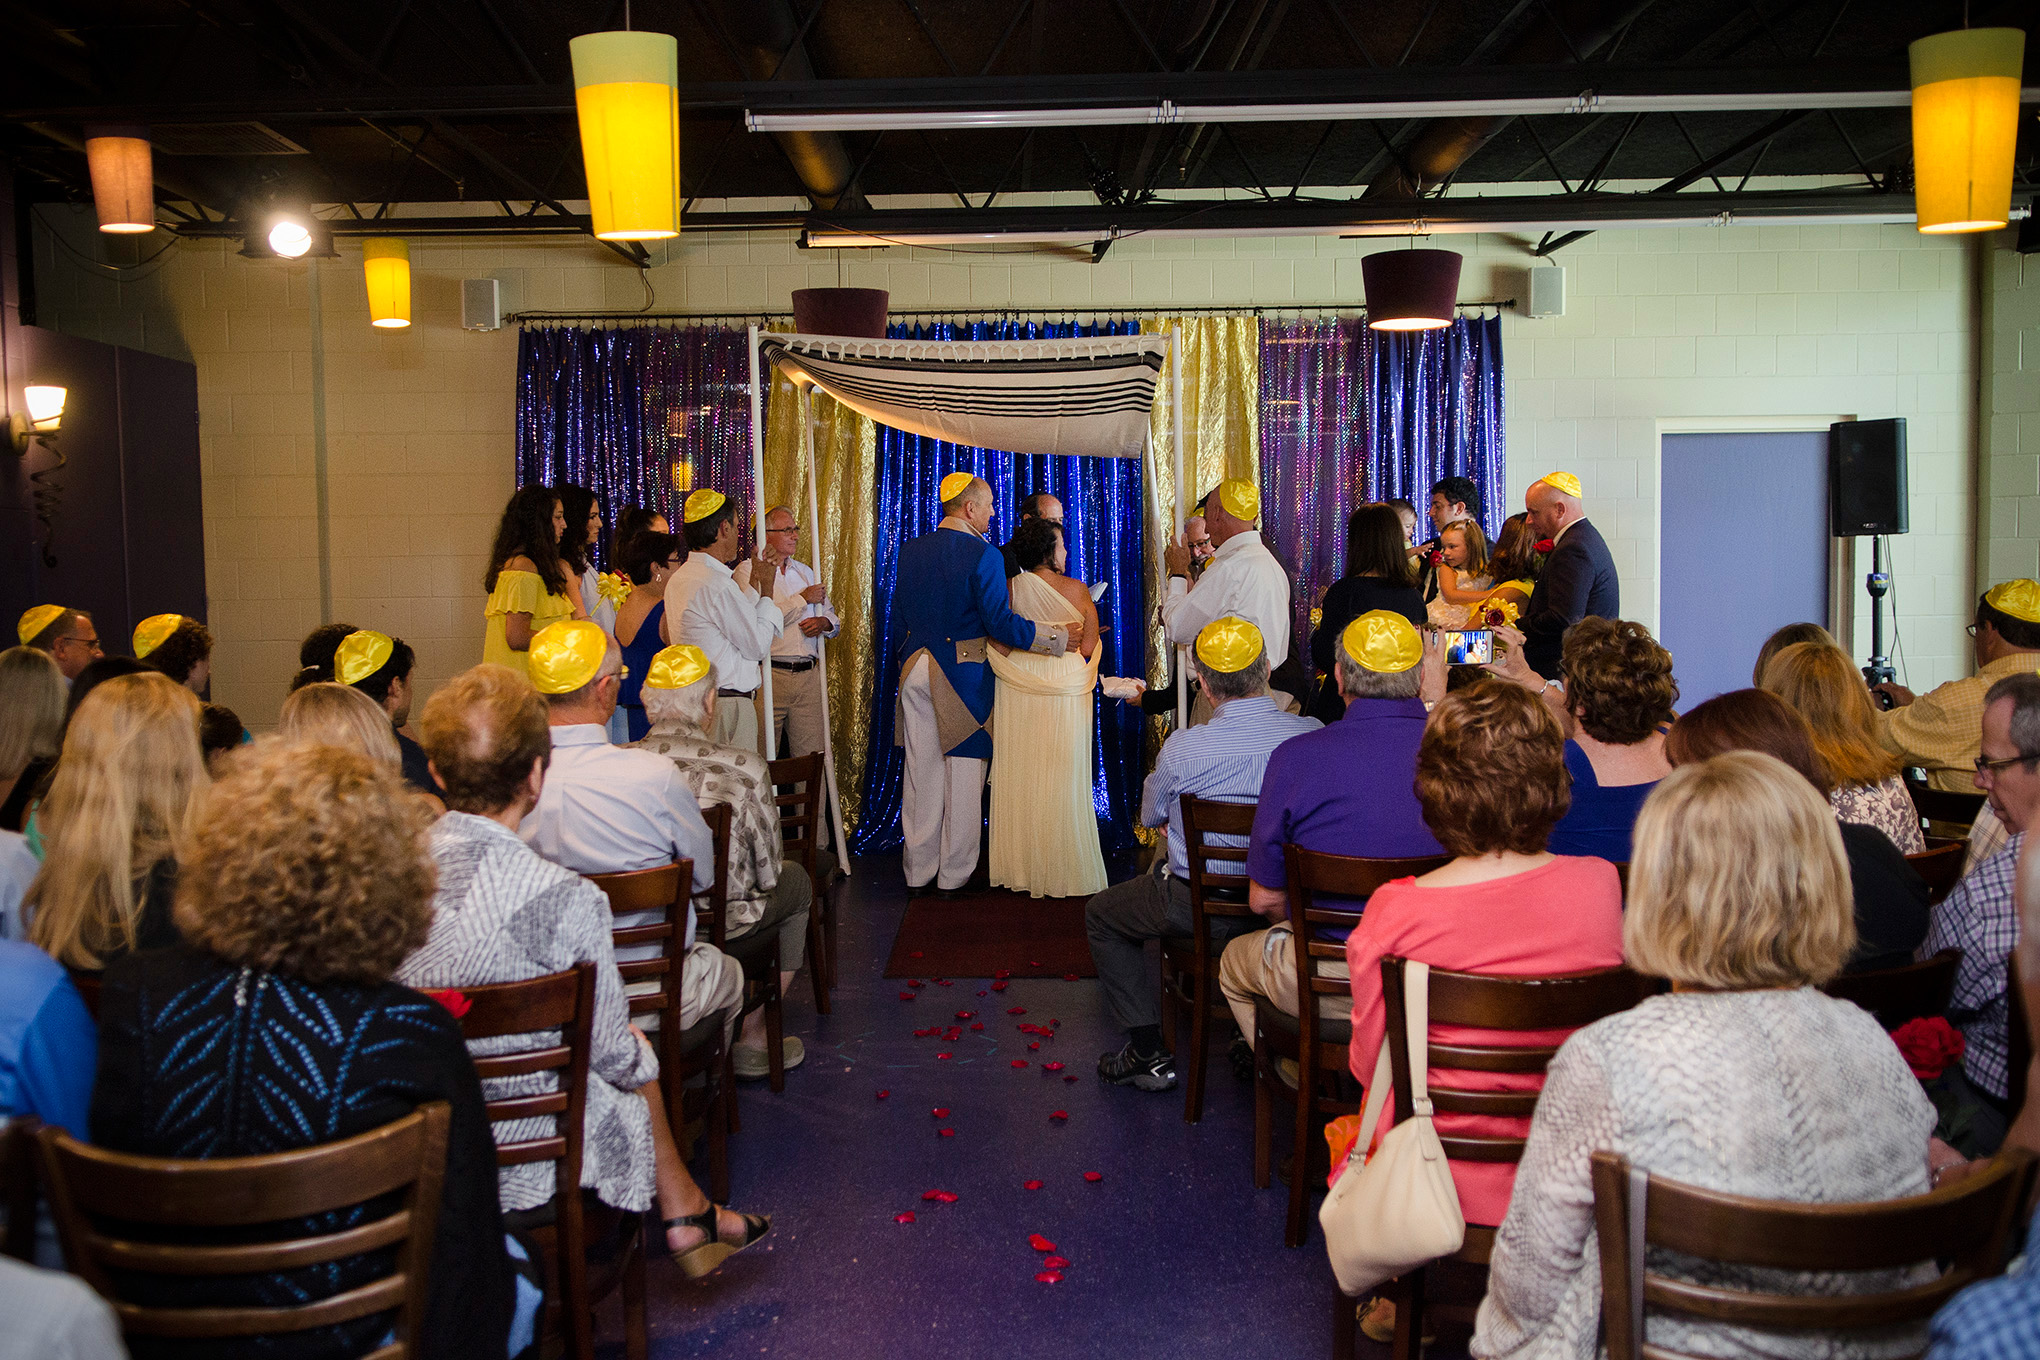 PHOTO: Newlyweds Arlene Sherman and Harvey Goldman had a "Beauty and the Beast"-themed wedding to make it fun for their grandchildren.